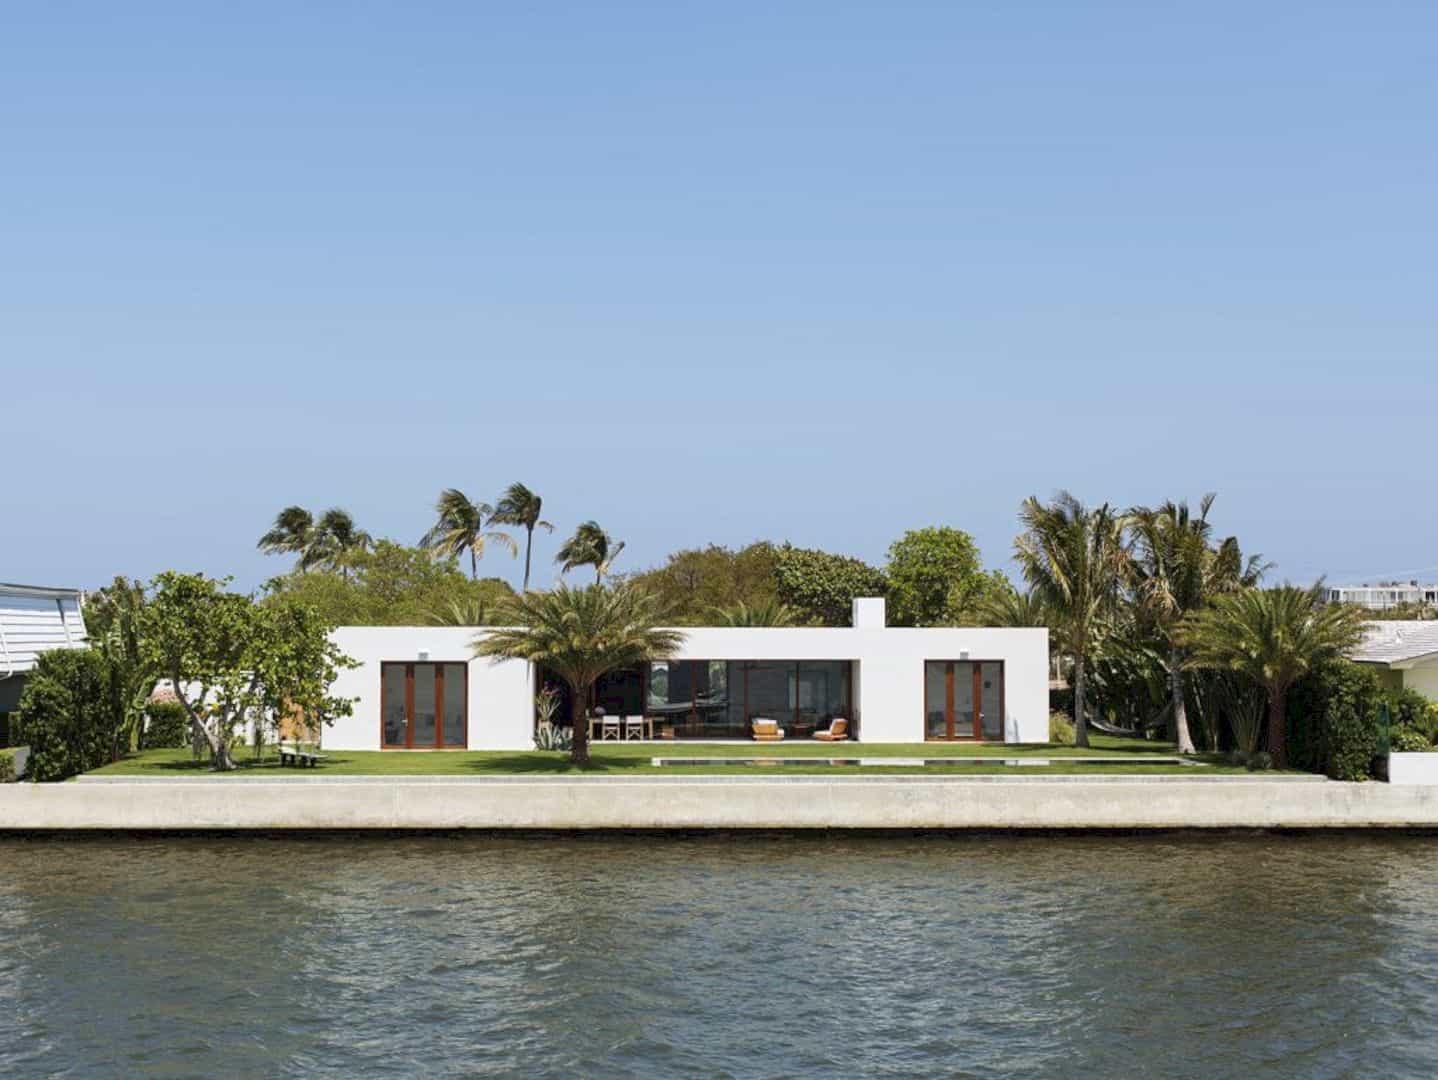 House In Florida A Single Family Residence In Casual Luxury Design And Modern Simplicity 8